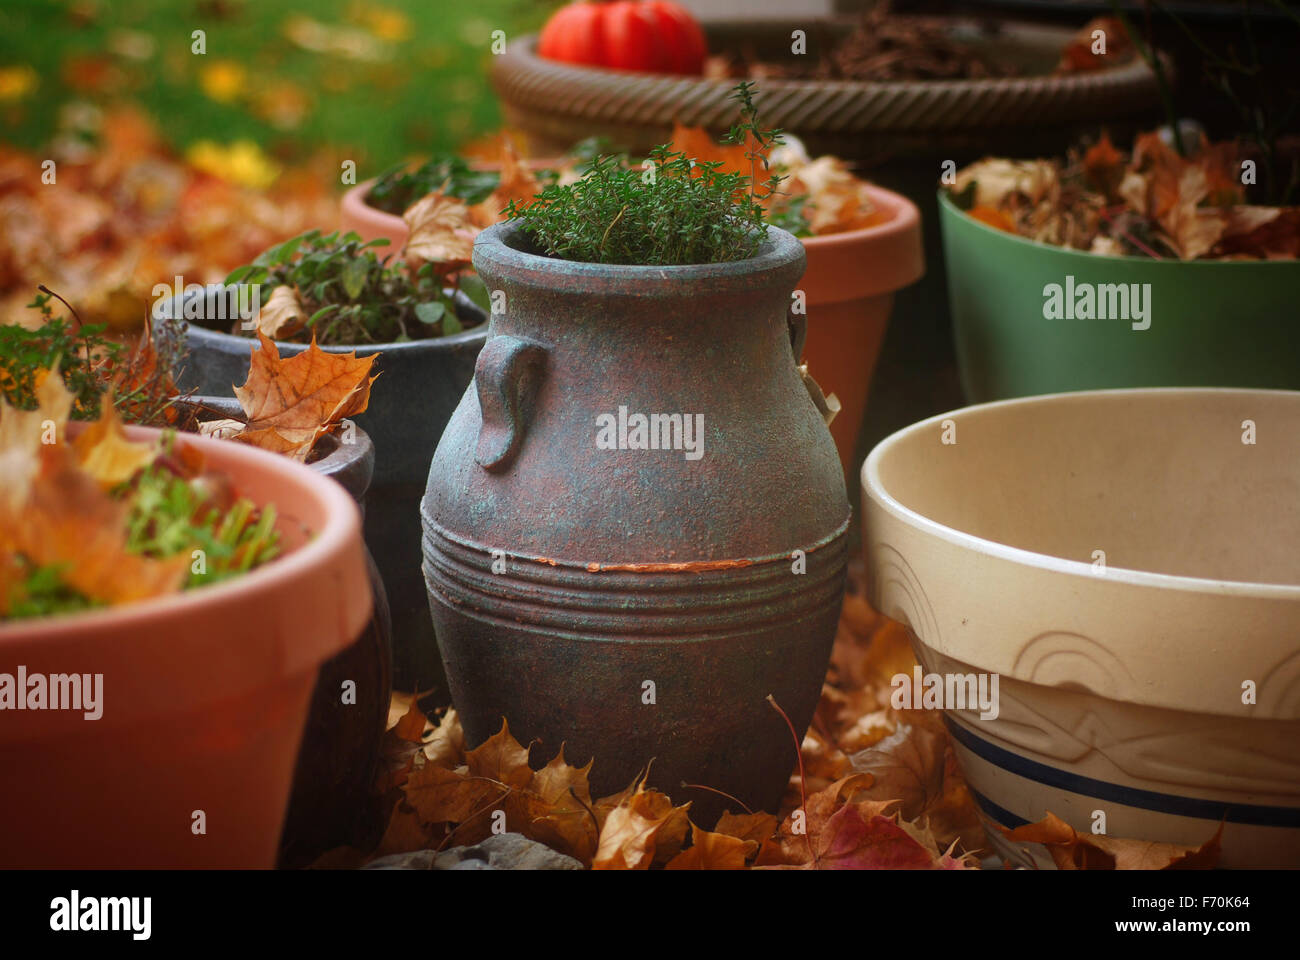 Pots of harvested herbs surrounded by autumn leaves Stock Photo